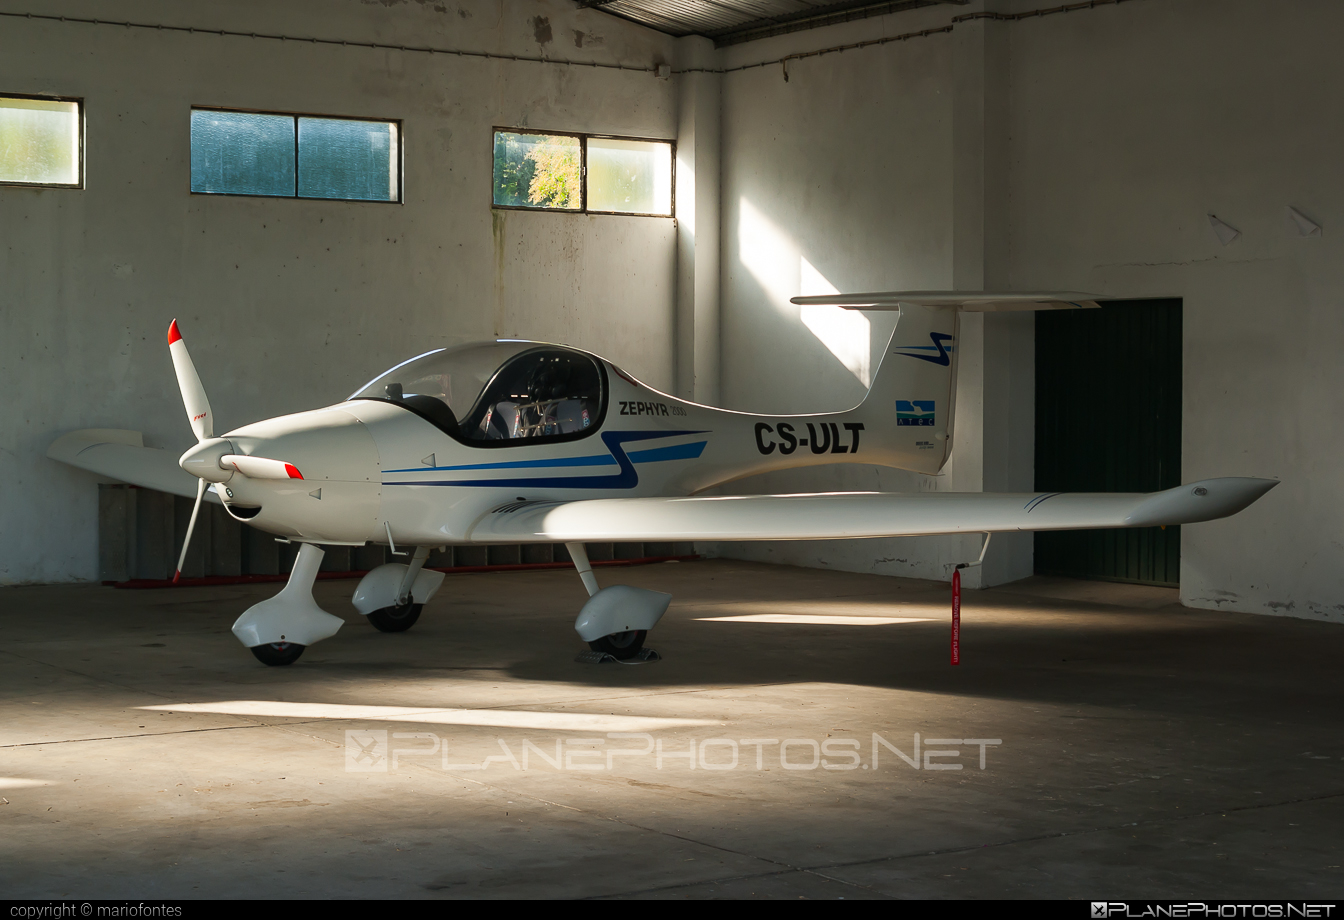 Atec Zephyr 2000 - CS-ULT operated by Private operator #atecaircraft #ateczephyr #ateczephyr2000 #zephyr2000